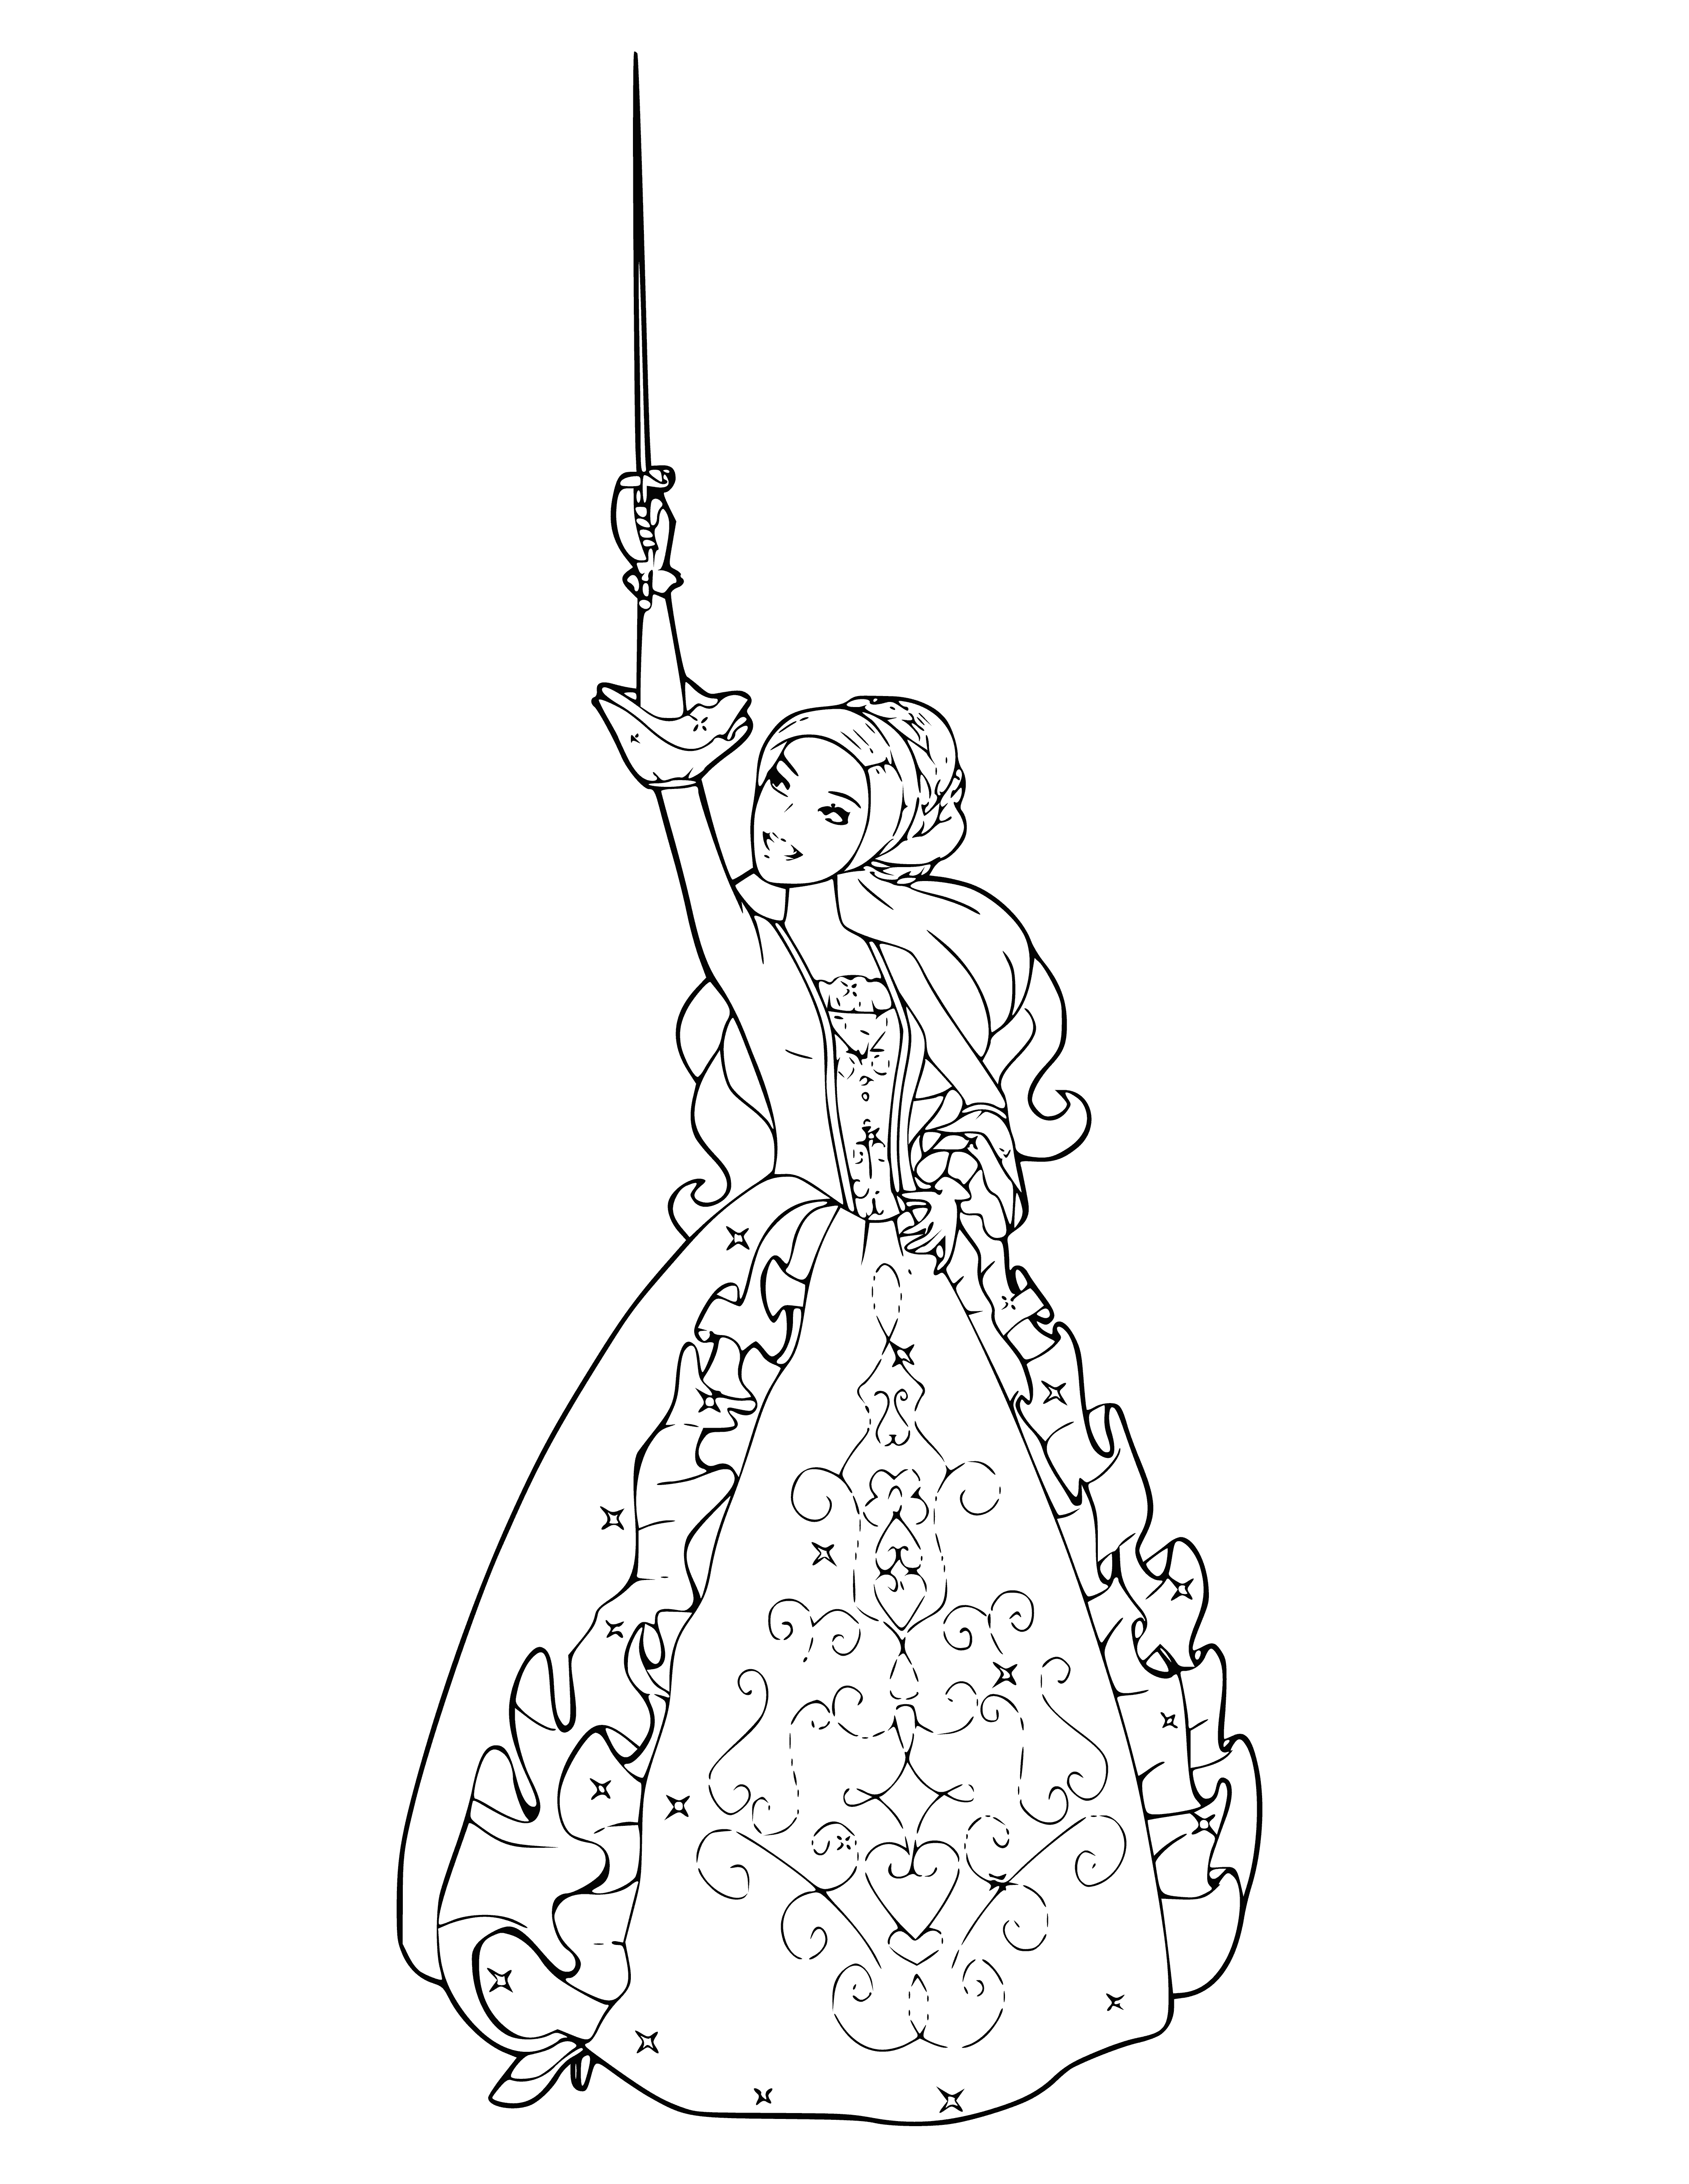 Barbie with a raised sword coloring page